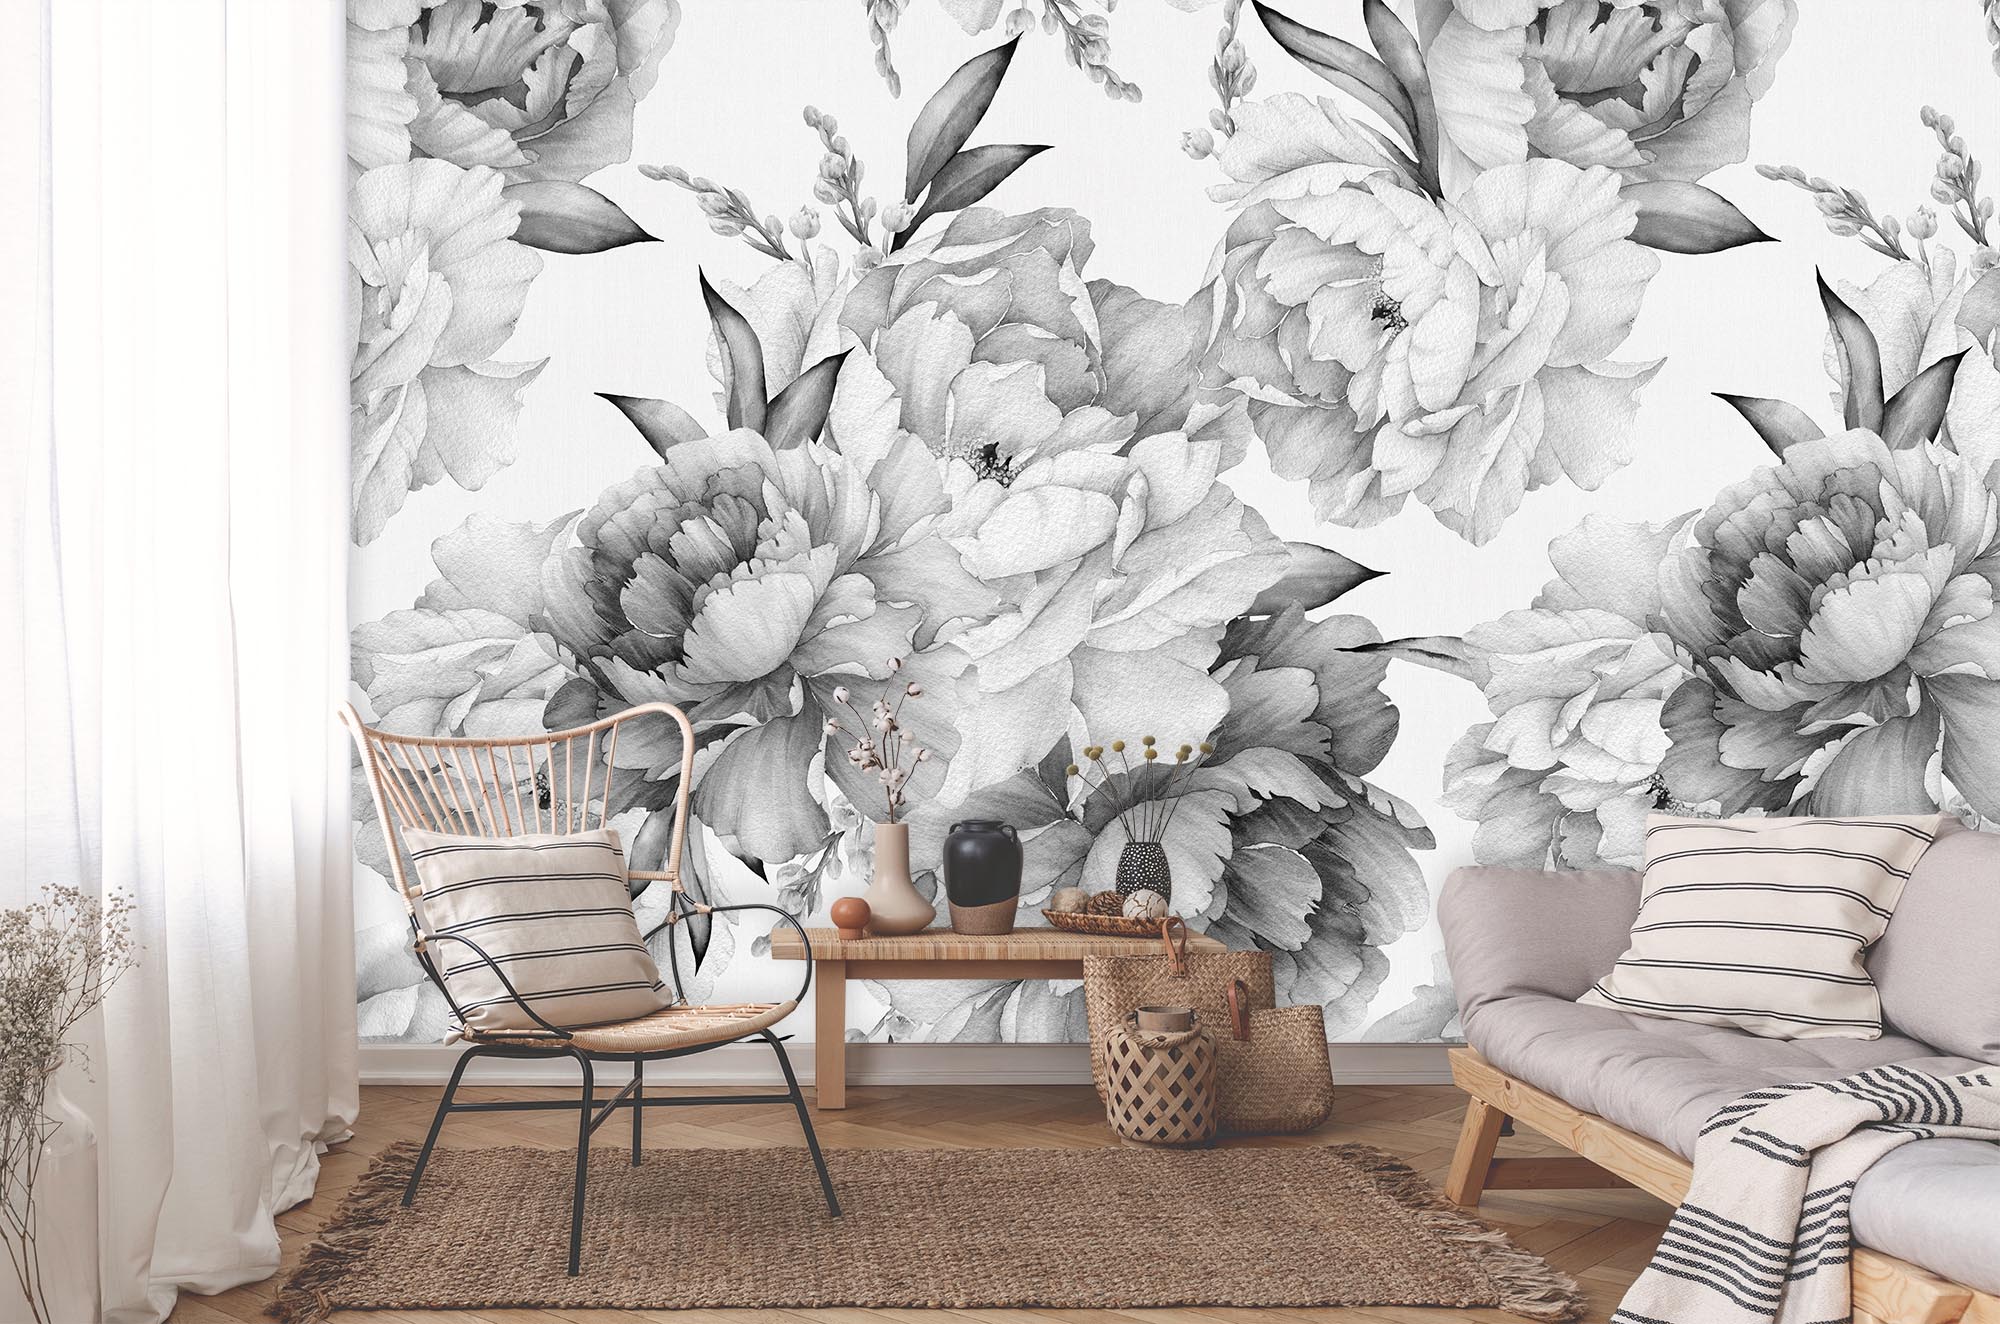 Black And White Peonies Flowers Floral Wallpaper